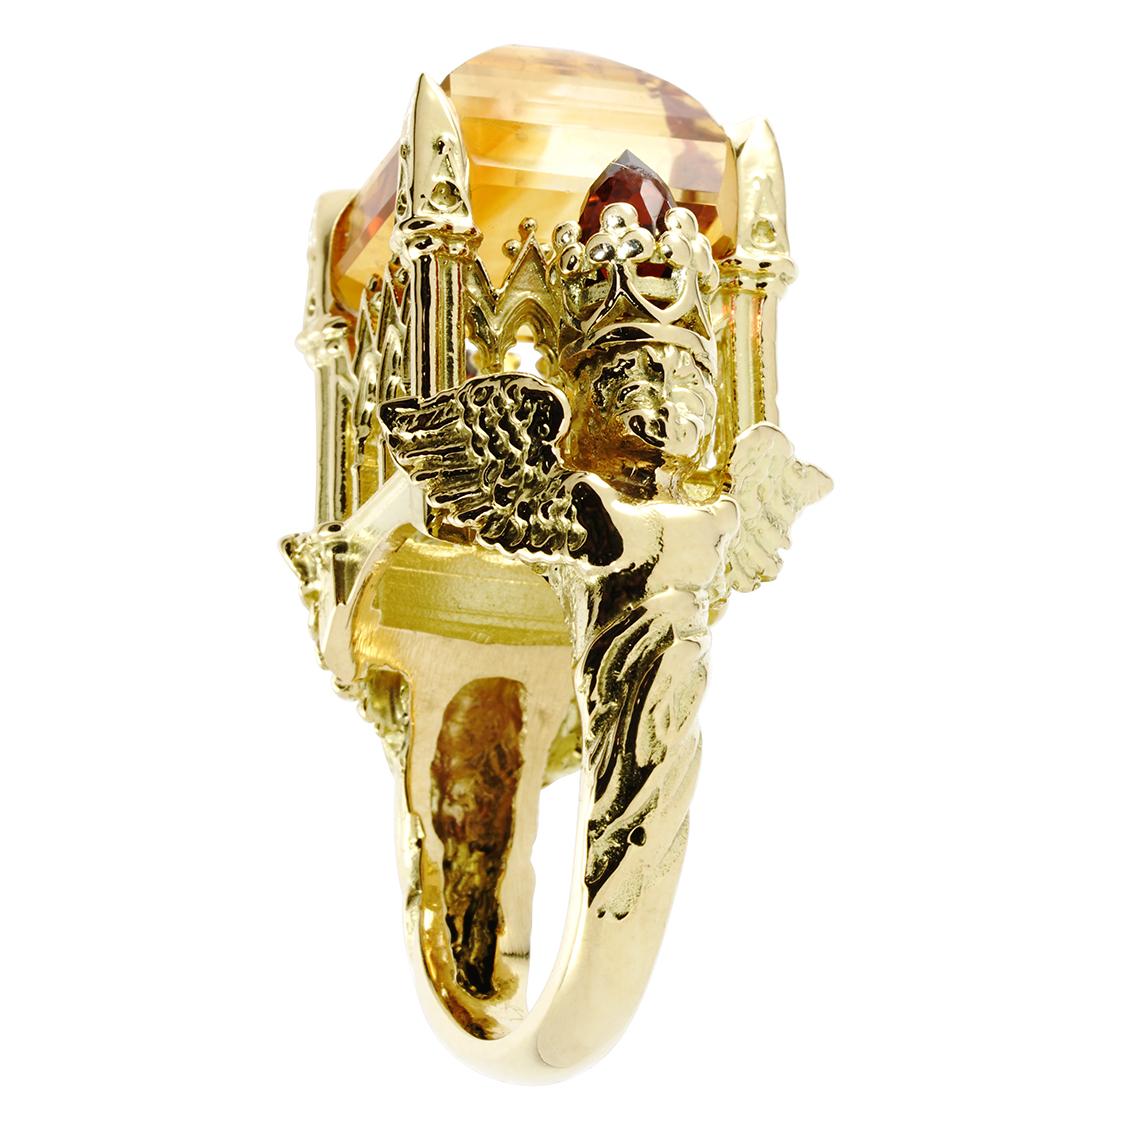 Gothic Cathedral Ring in 18 Karat Yellow Gold, Citrine and Garnets In New Condition For Sale In Melbourne, Vic